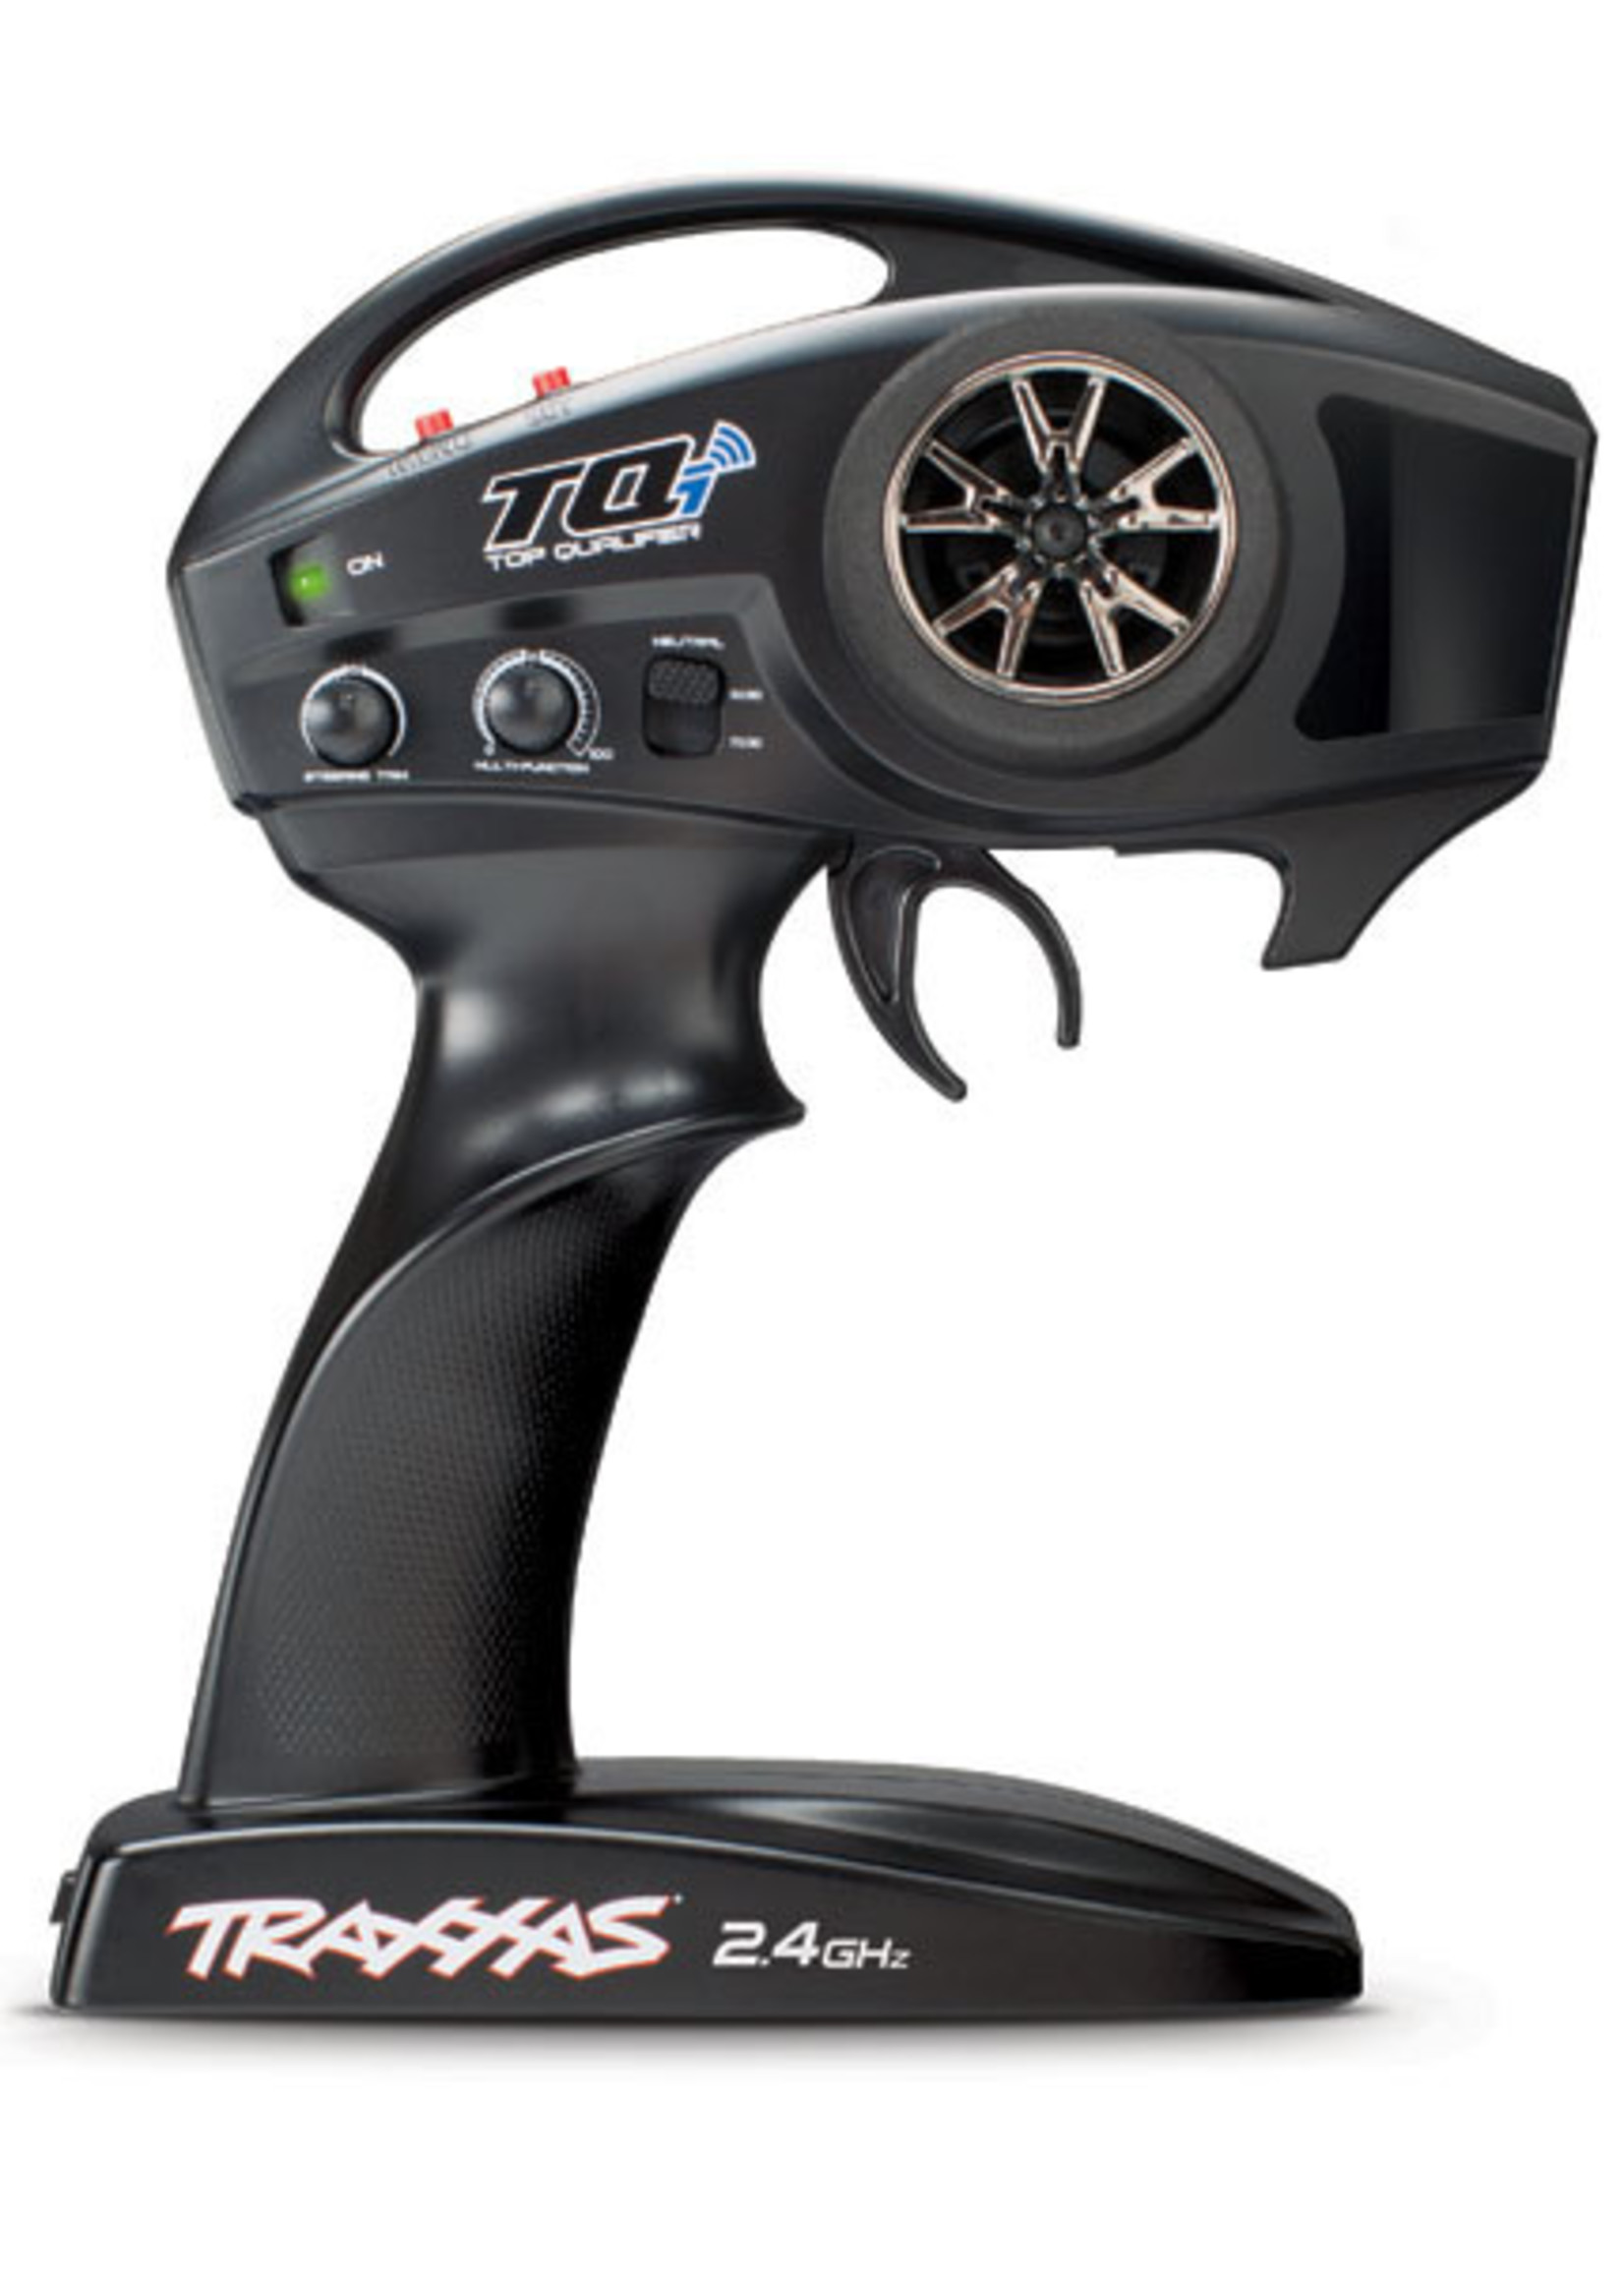 Traxxas TRA6528 Traxxas Transmitter, TQi Traxxas Link™ enabled, 2.4GHz high output, 2-channel (transmitter only)